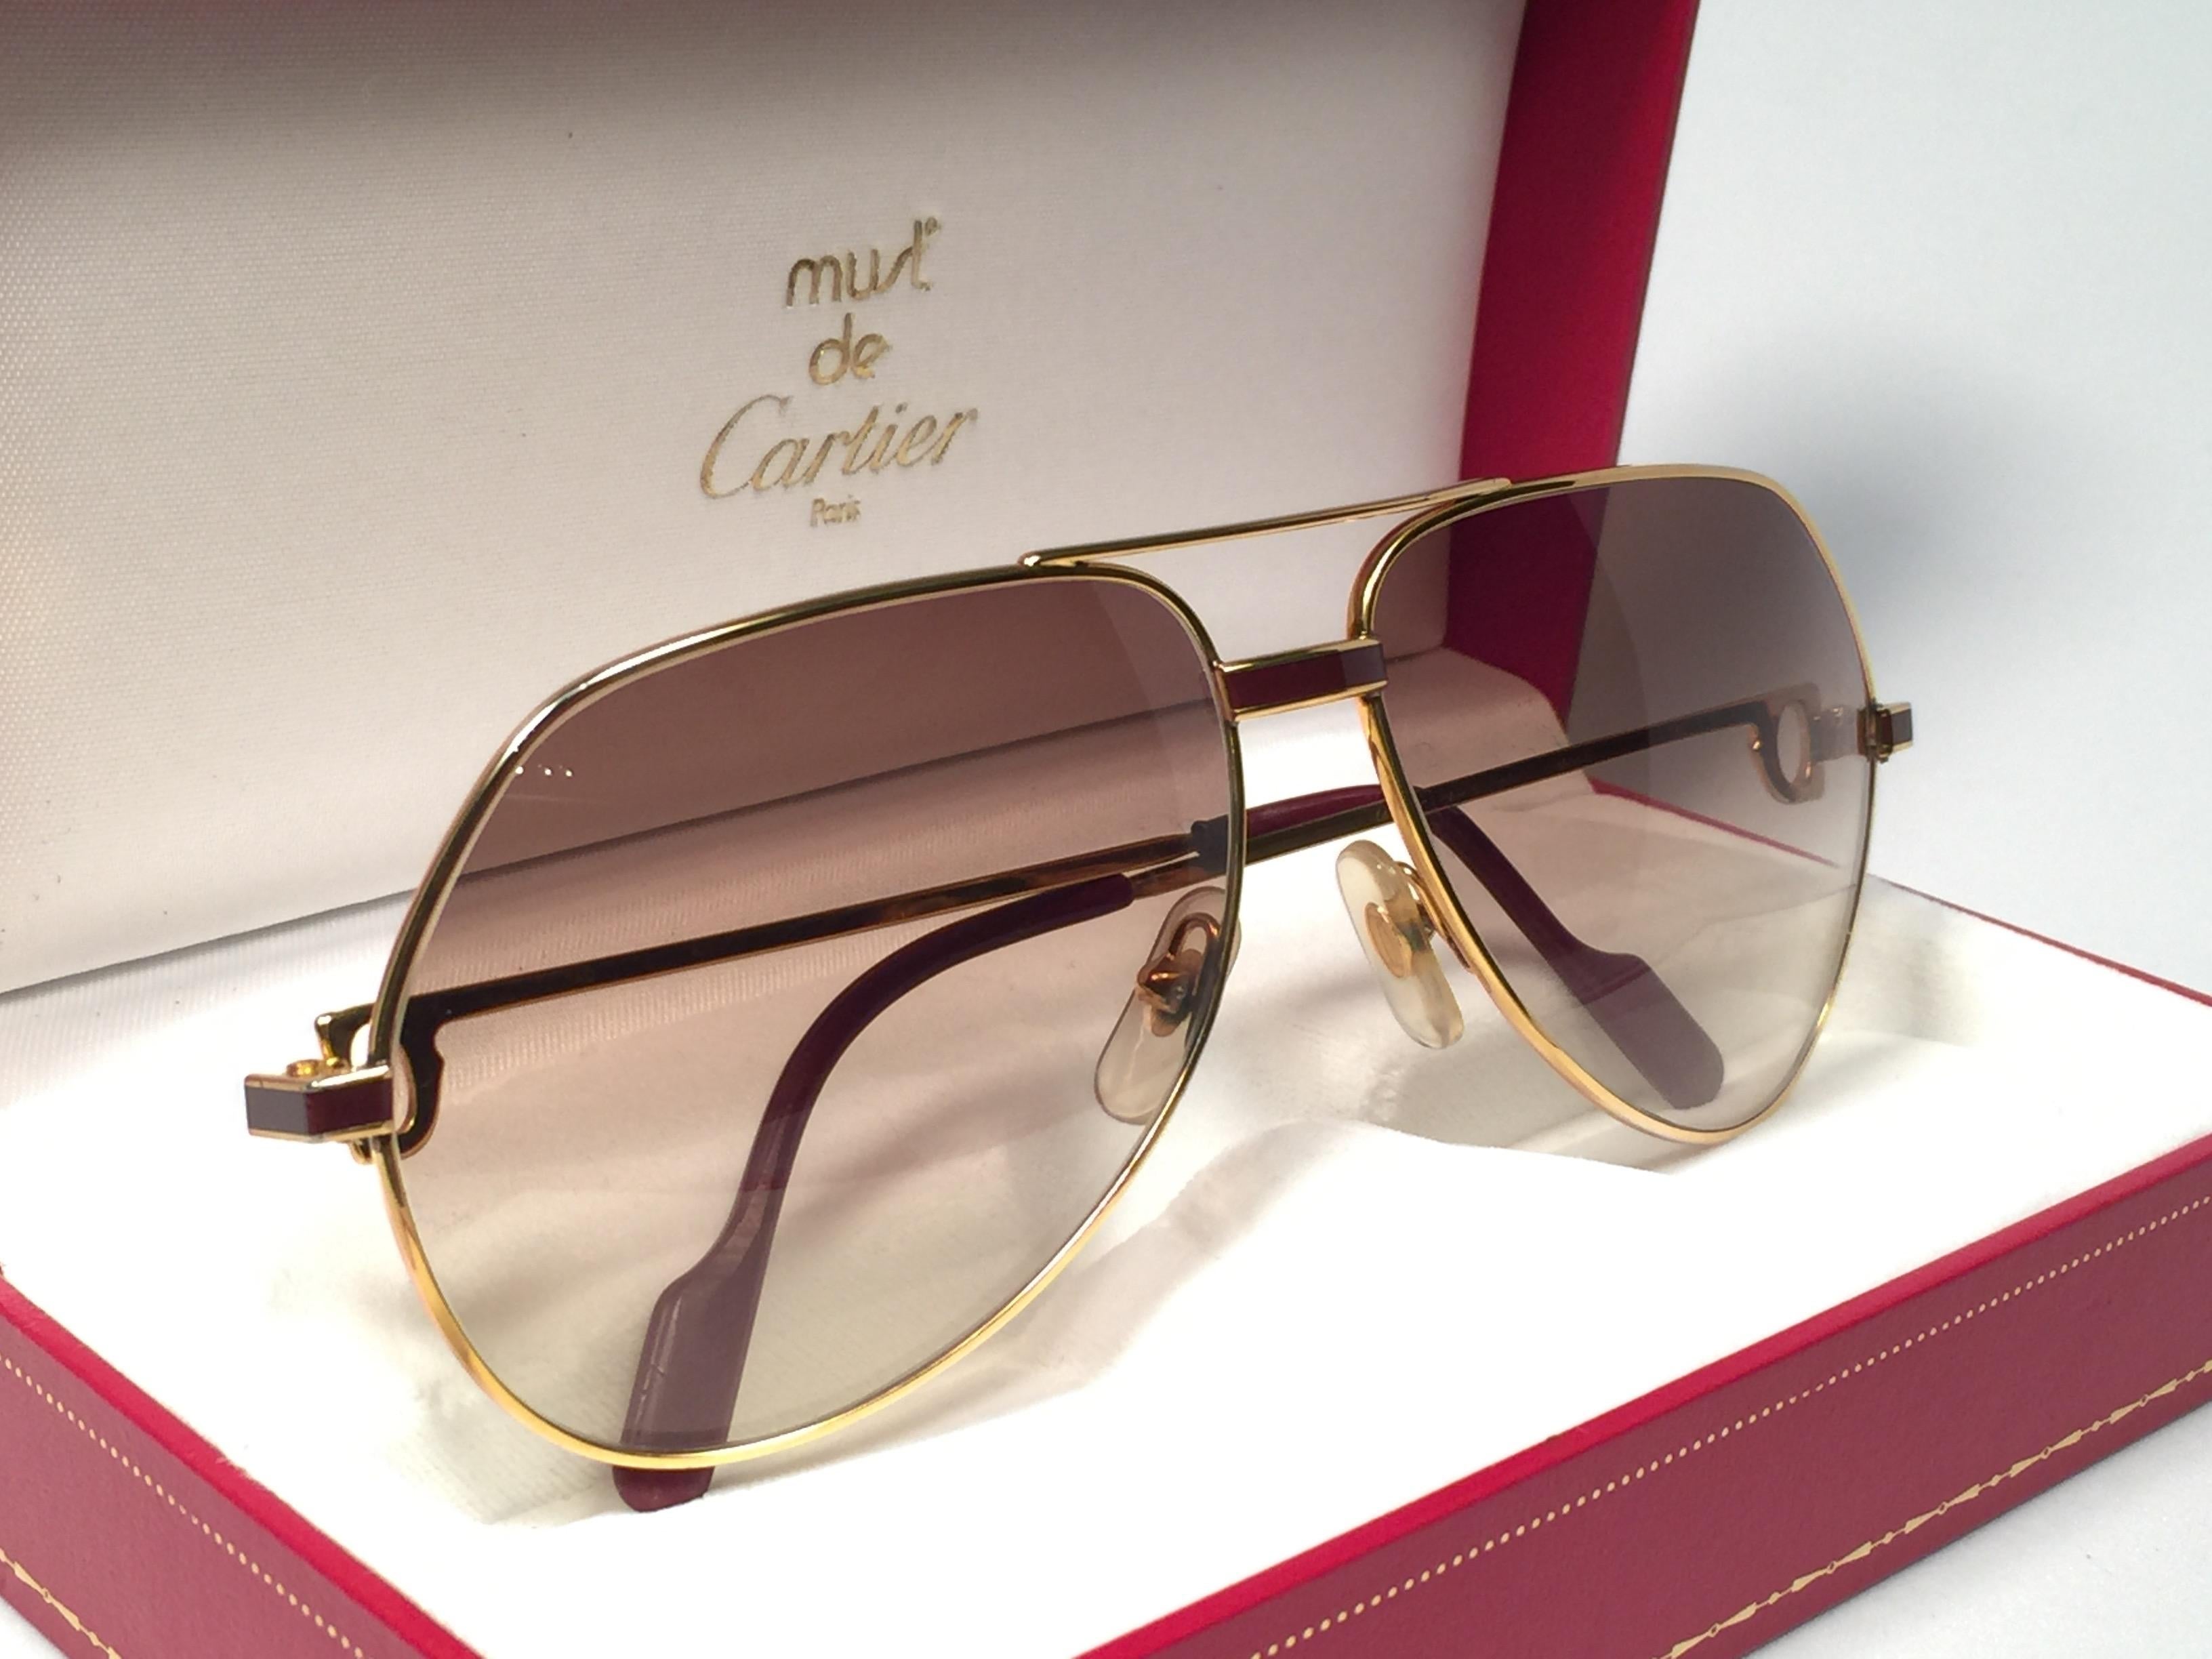 New from 1983!!! Cartier Aviator Laque de Chine Heavy plated gold sunglasses with brown gradient  (uv protection) Lenses.
All hallmarks. 
Red enamel with Cartier gold signs on the ear paddles. 
Both arms sport the C from Cartier on the temples.
